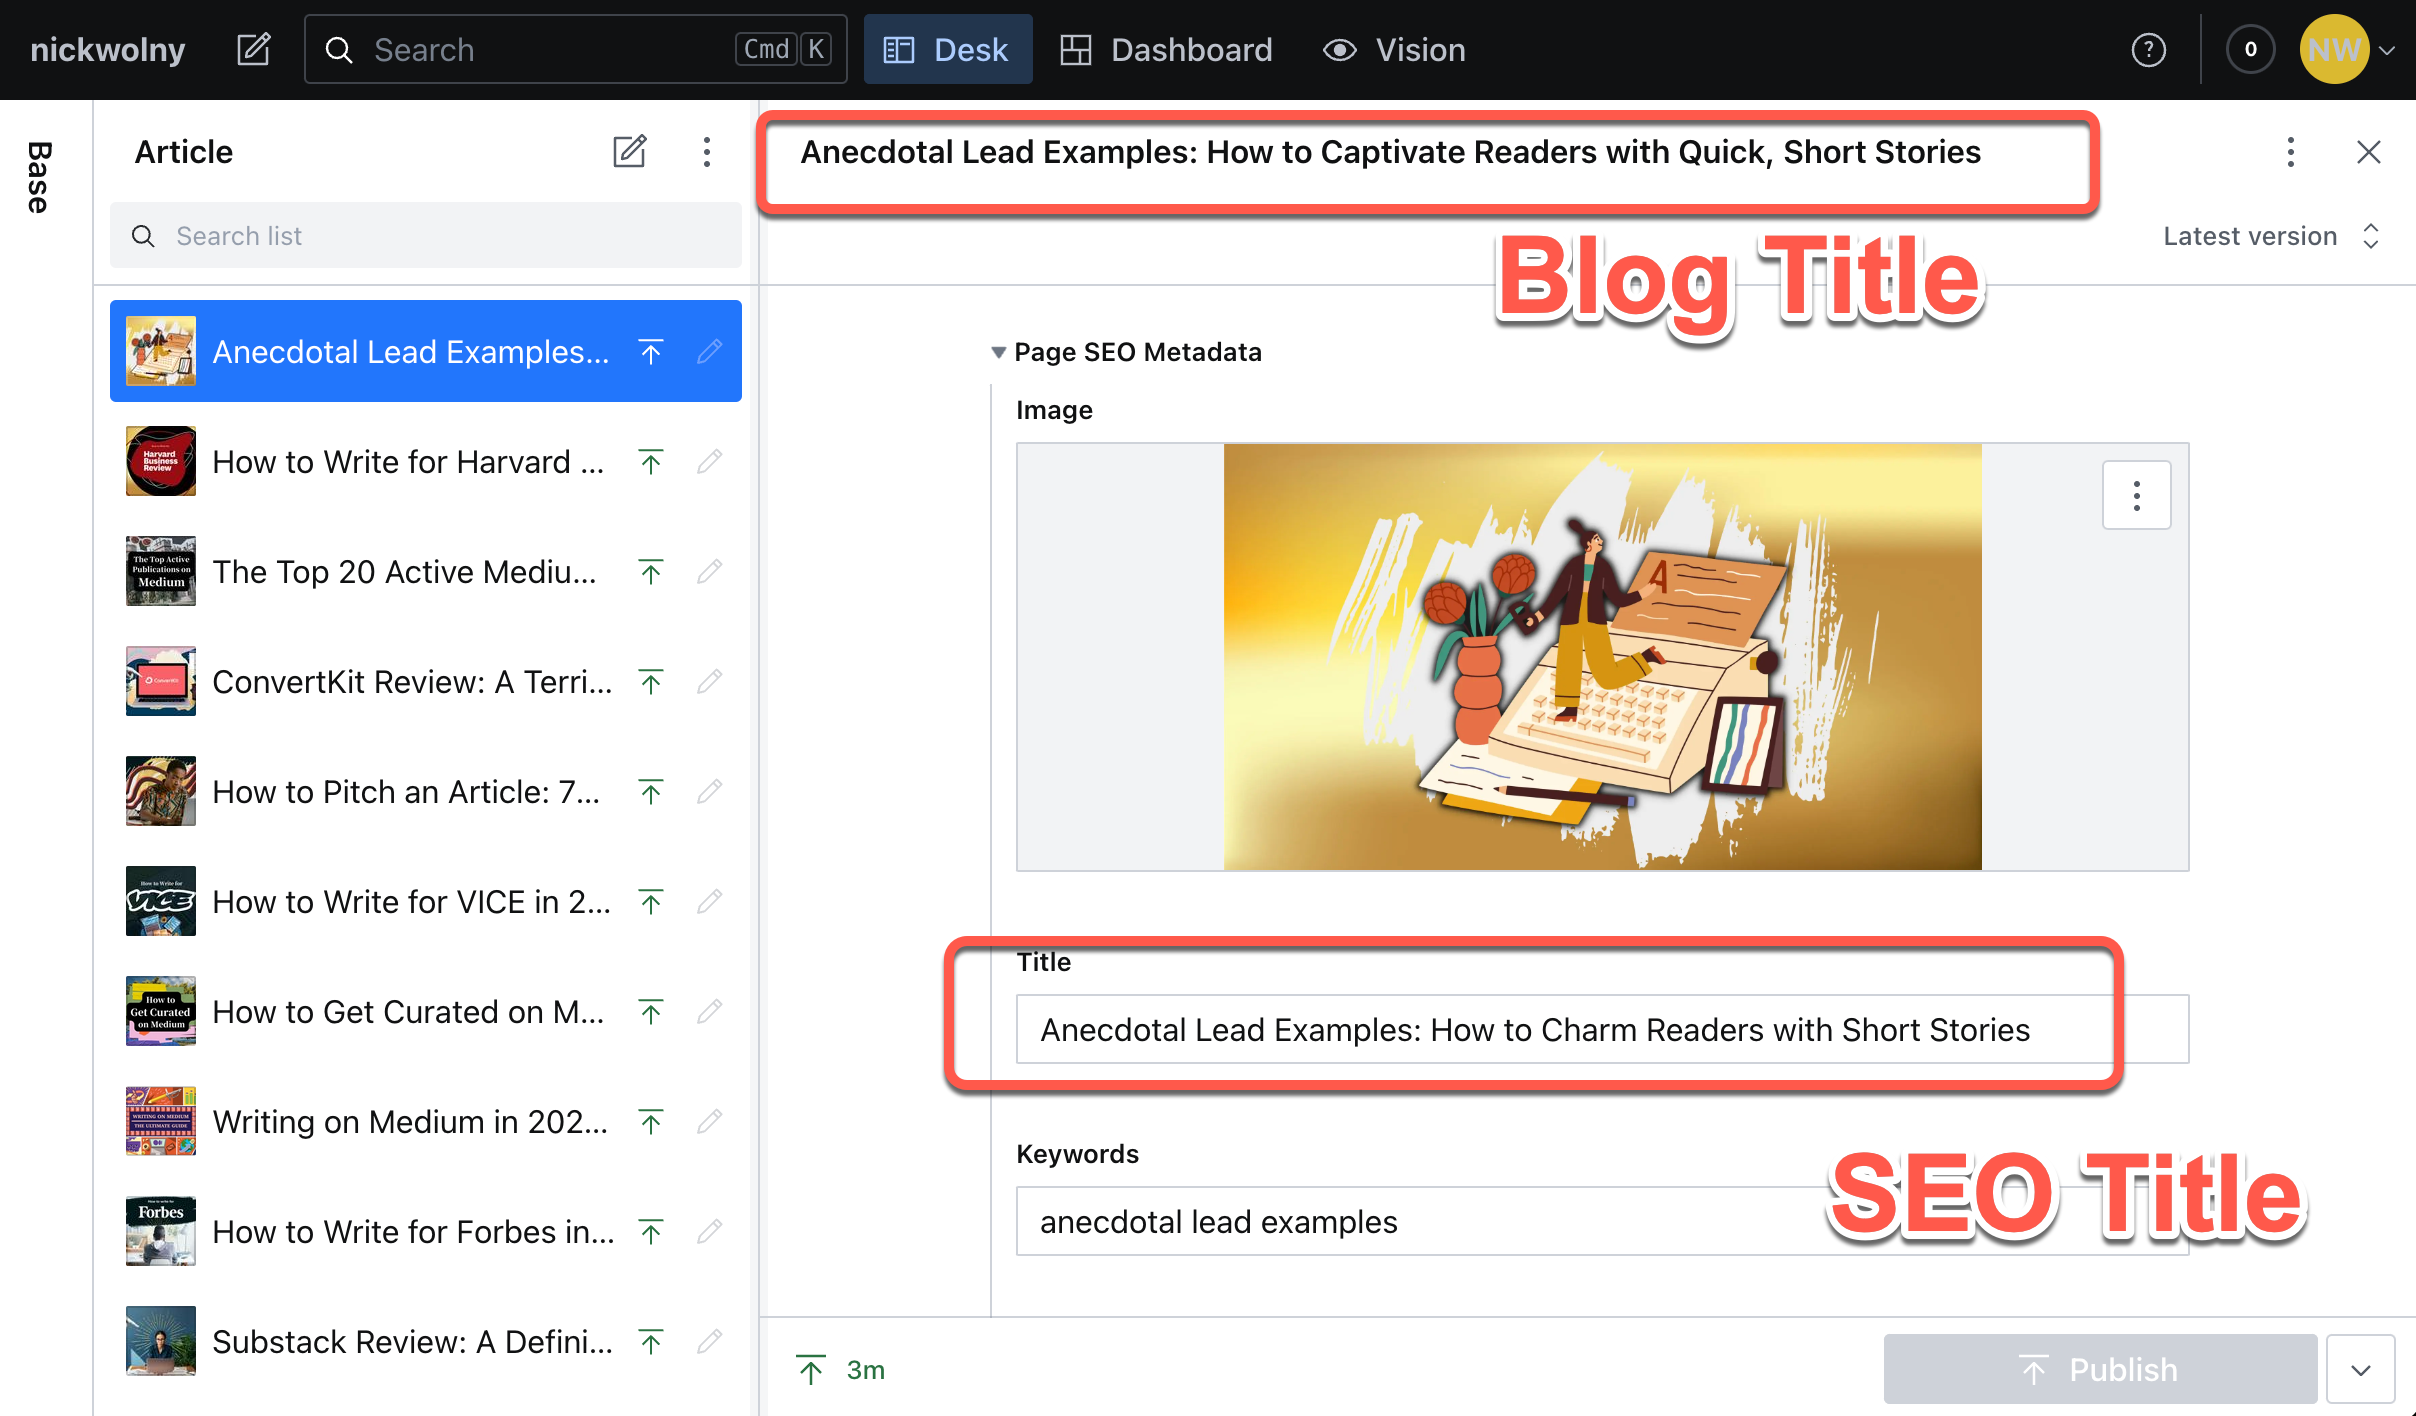 Screenshot of CMS backend showing different spots for blog title and SEO title, to improve seo for writers